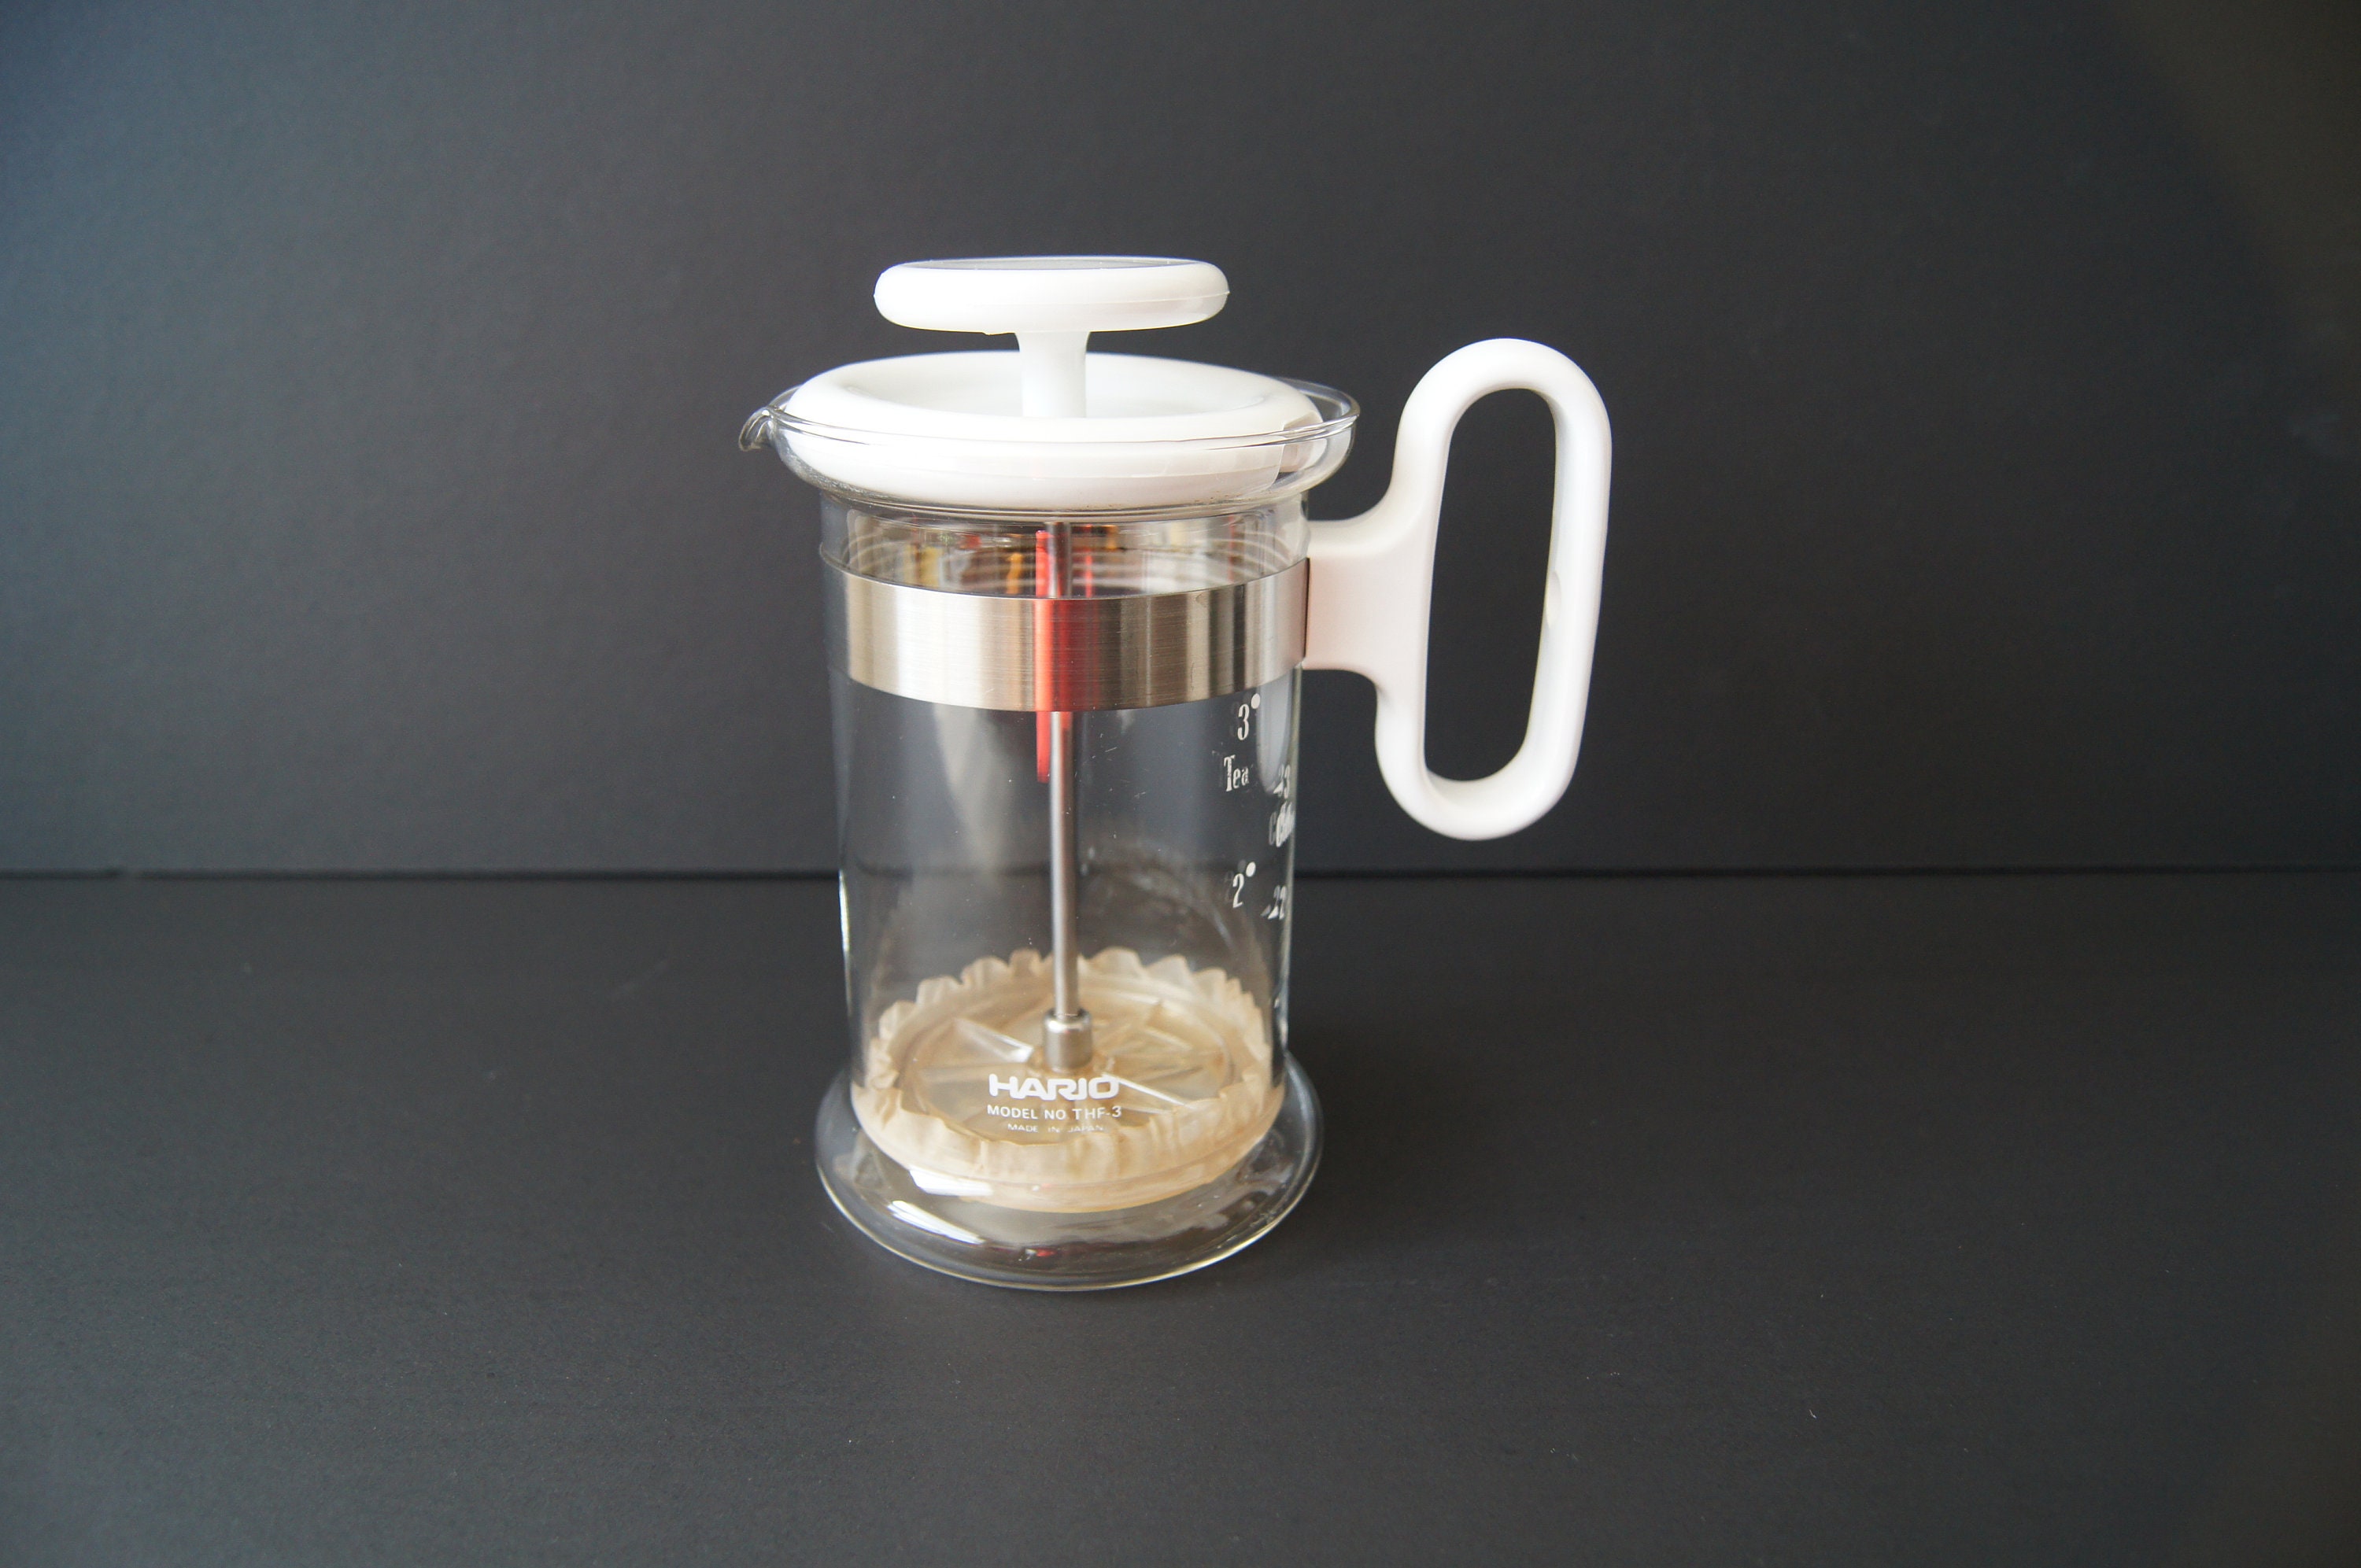 Vintage Japanese Hario Coffee & Tea French Press Maker 4 Cup TH-4